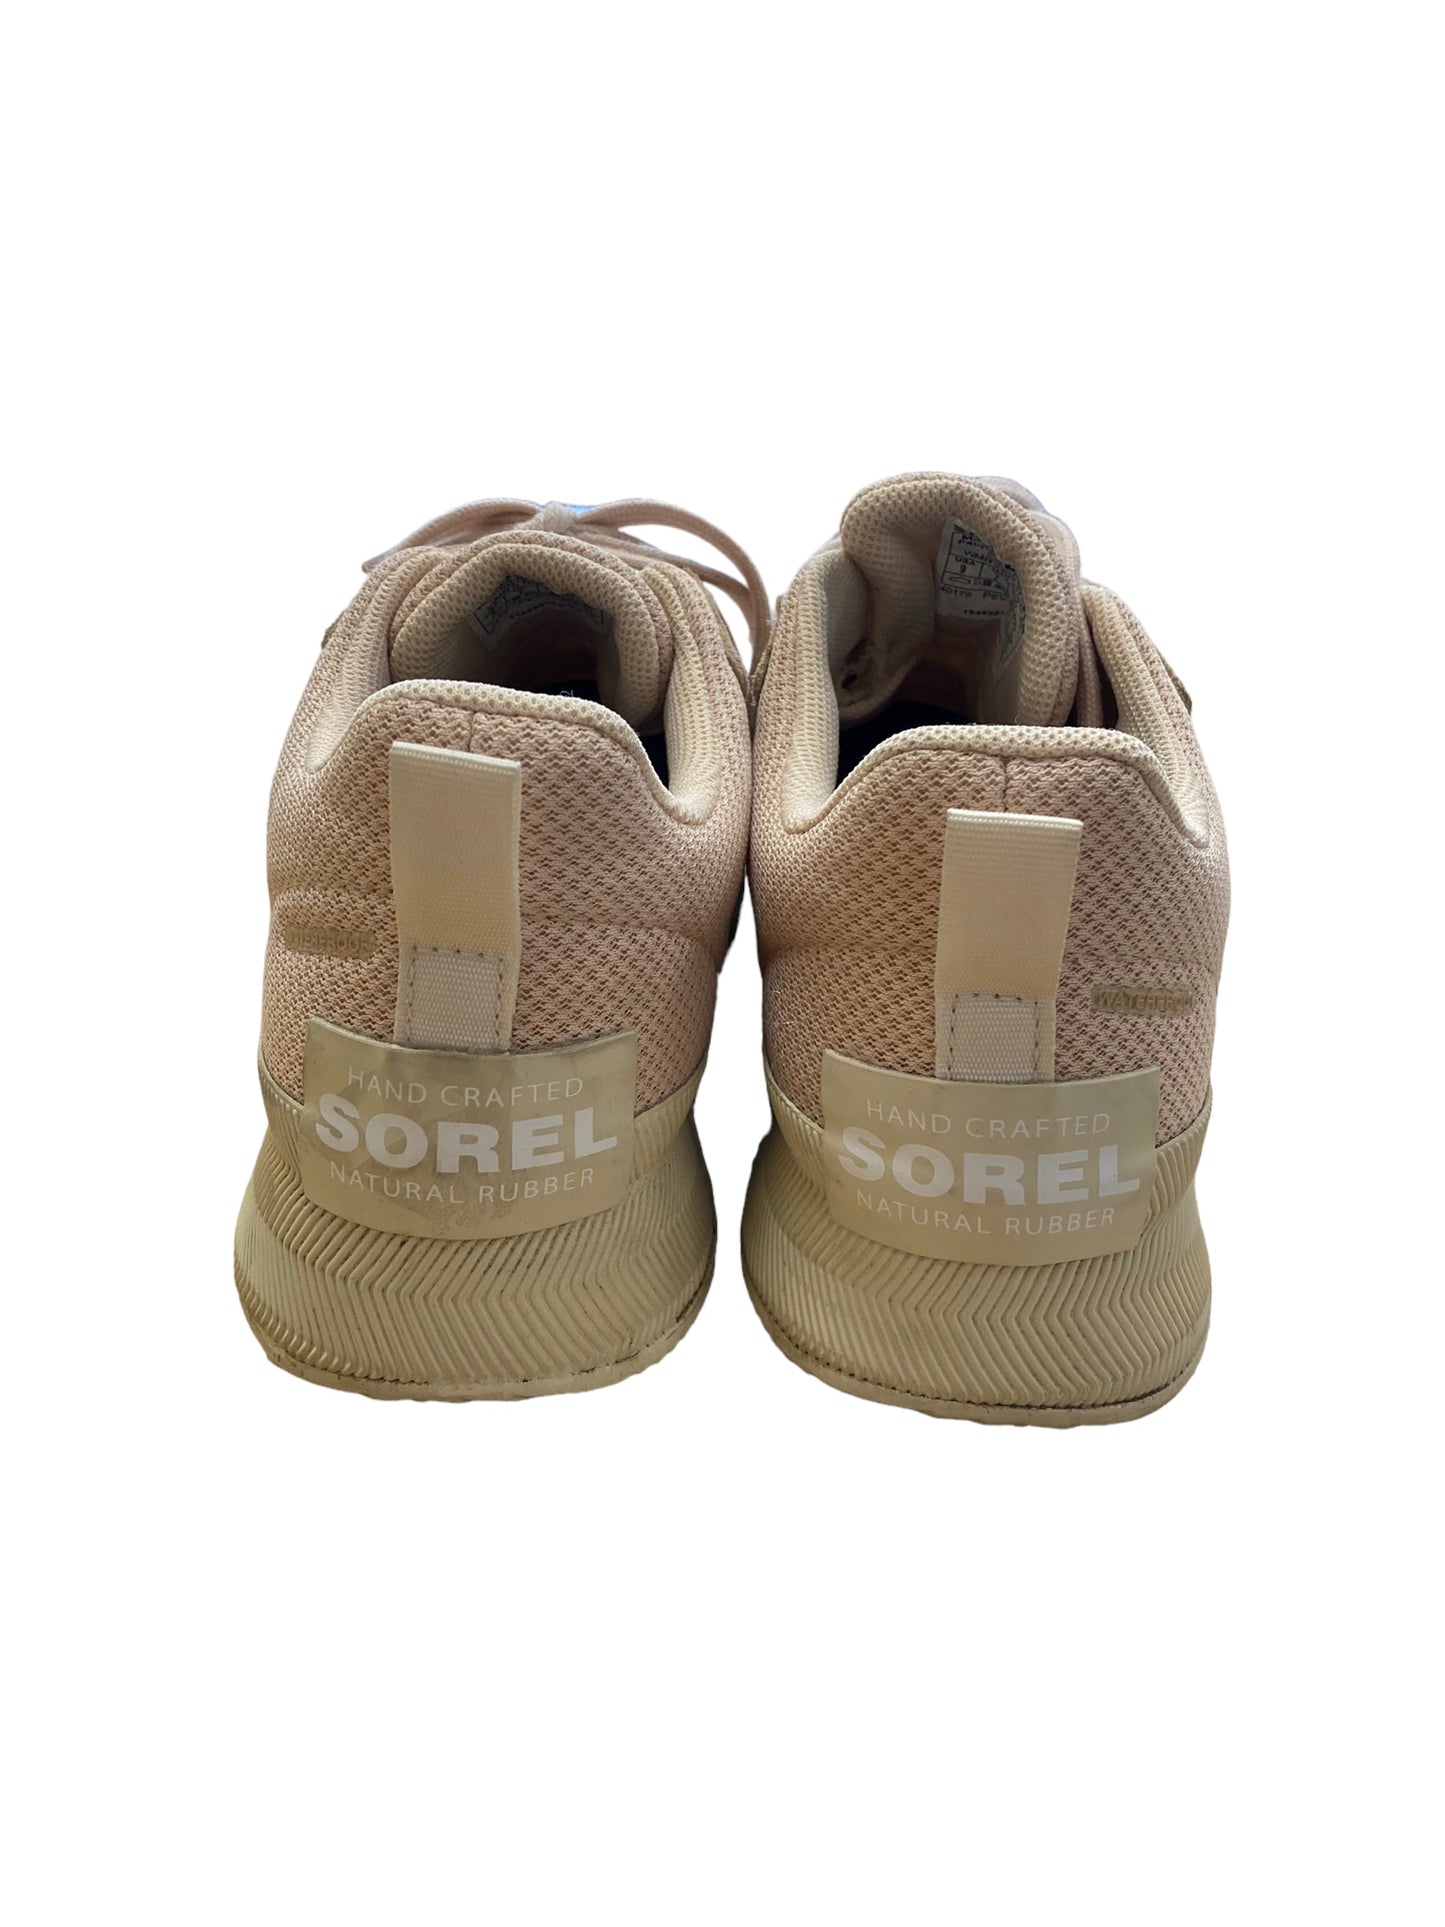 Shoes Athletic By Sorel  Size: 9